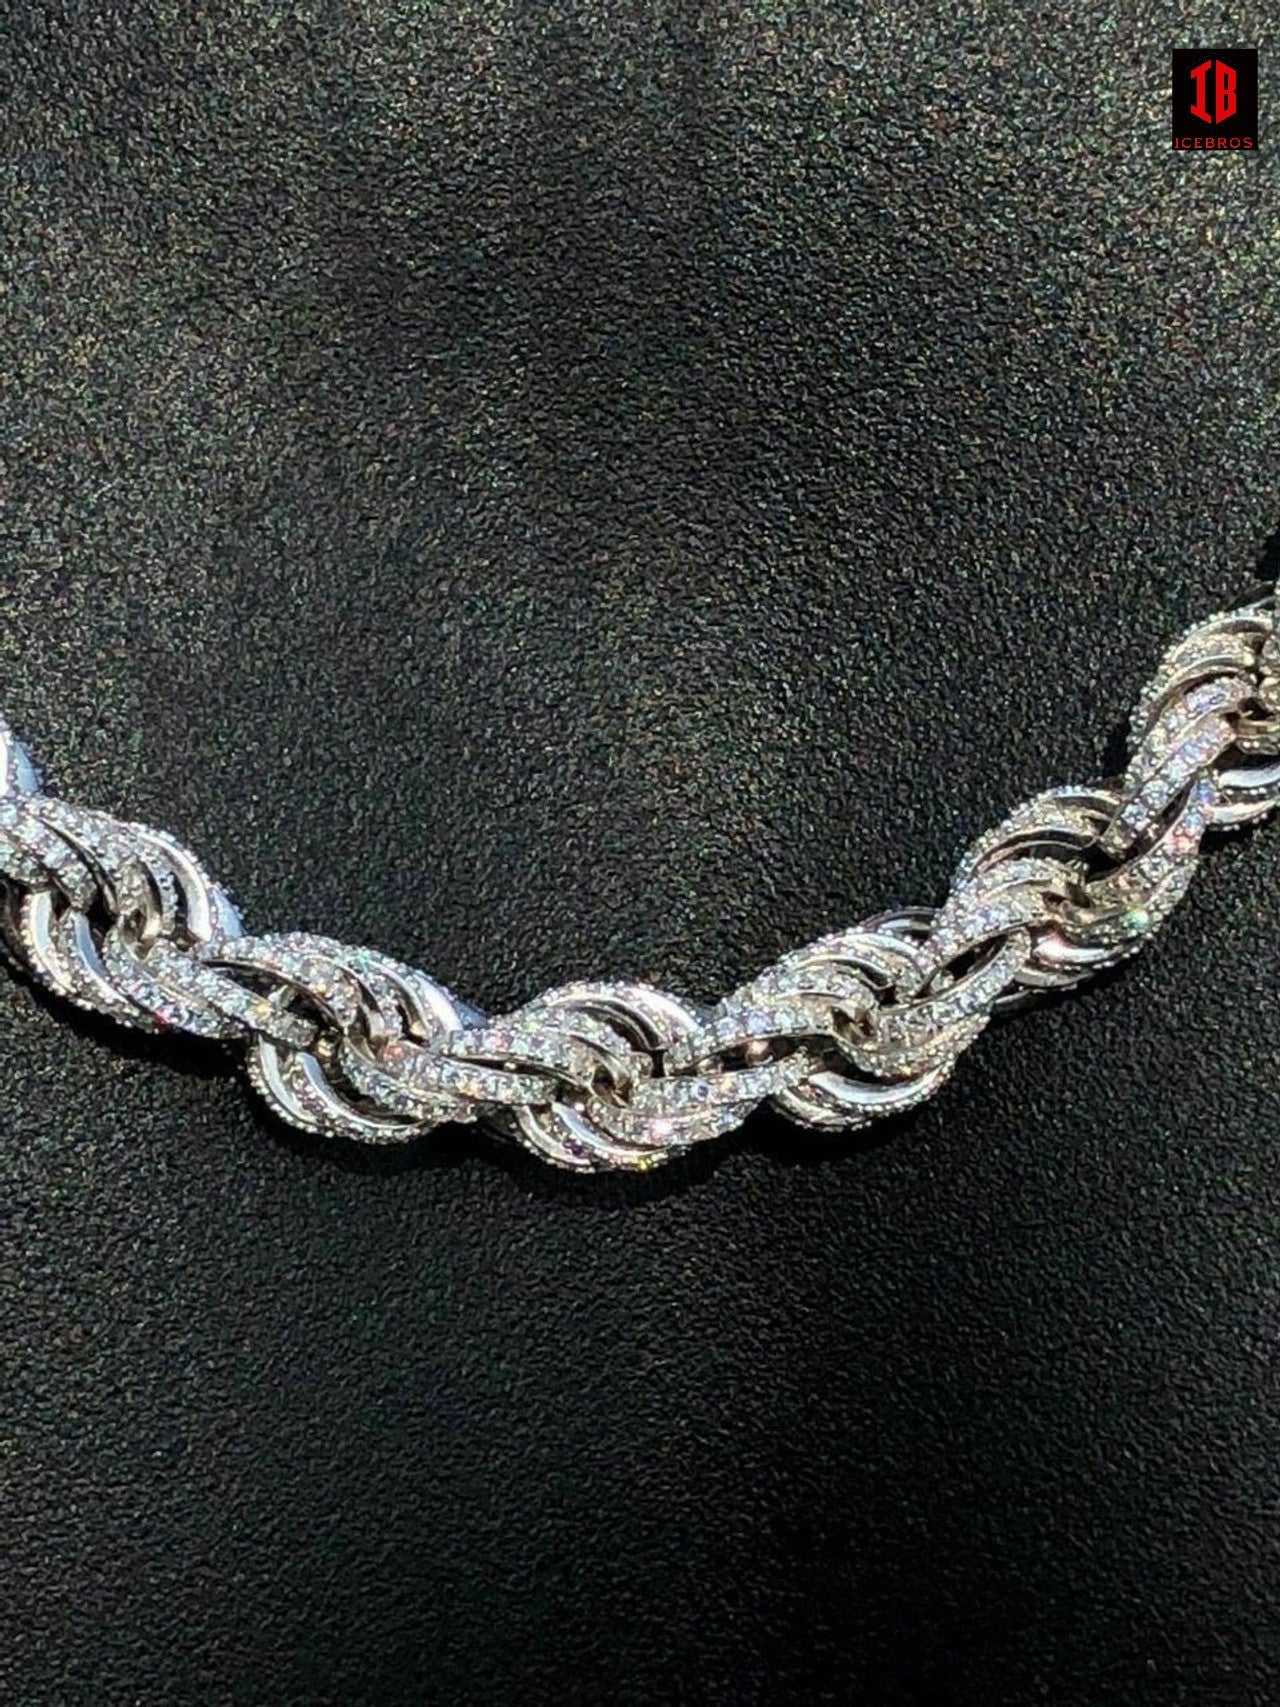 WHITE GOLD Men's Solid 925 Sterling Silver Men's Rope Chain Thick 9mm ICY CZ Diamond Choker